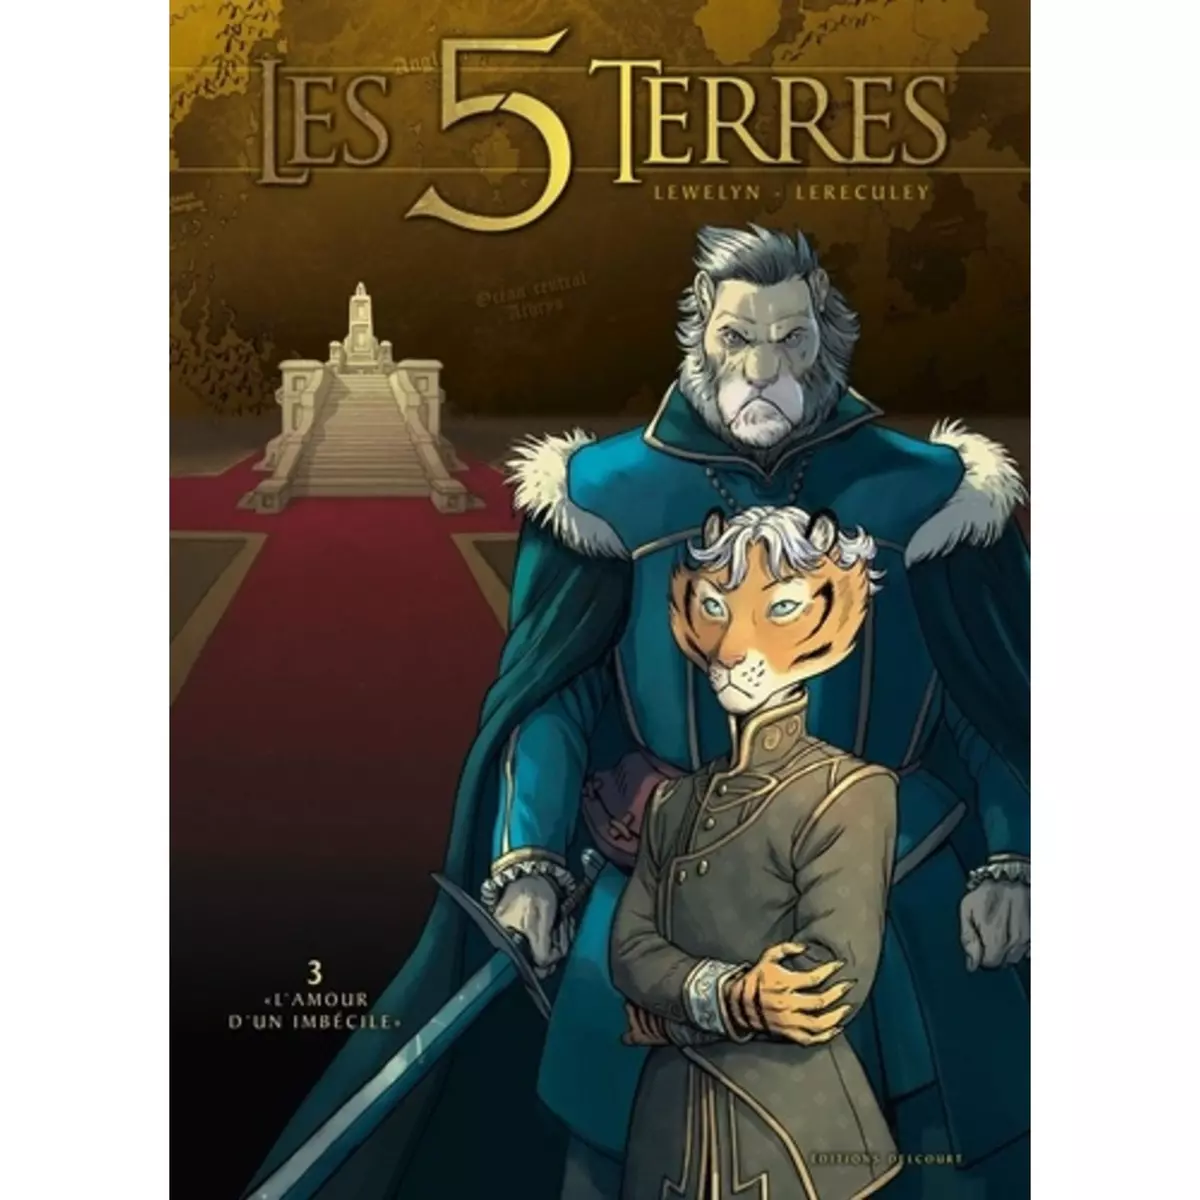  LES 5 TERRES : CYCLE I - ANGLEON TOME 3 : L'AMOUR D'UN IMBECILE, Lewelyn